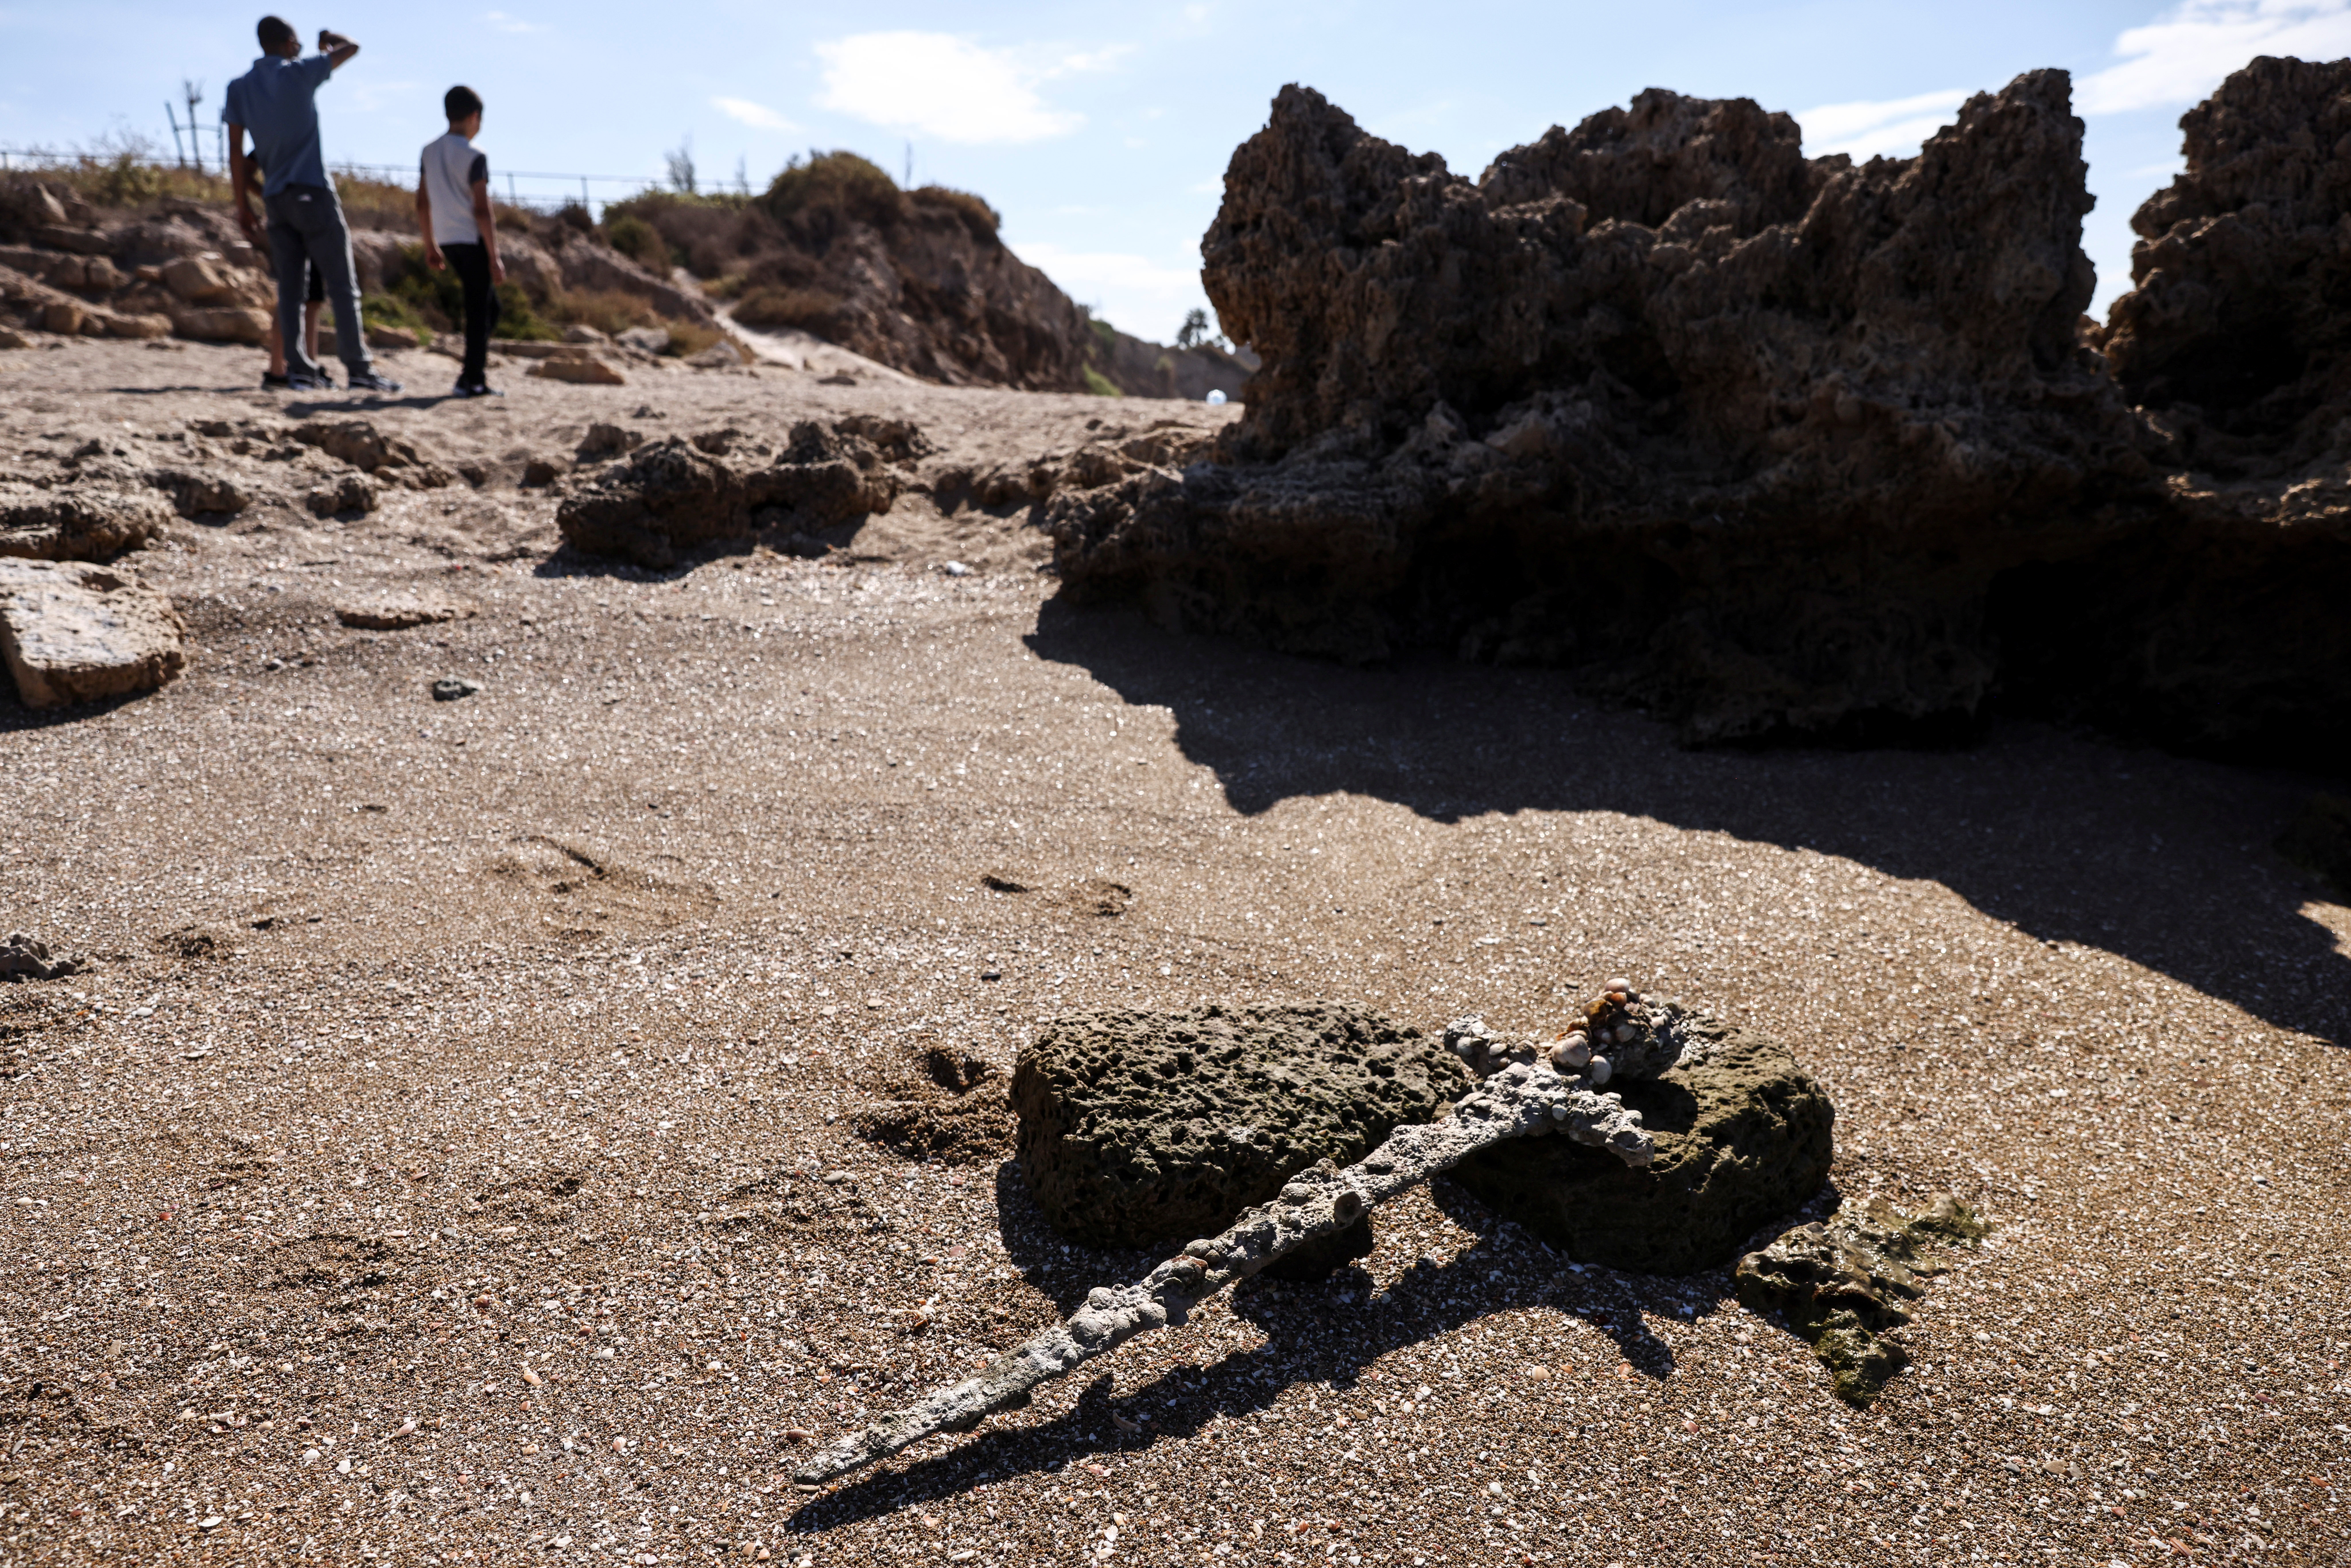 A sword believed to have belonged to a Crusader who sailed to the Holy Land almost a millennium ago was found in Caesarea